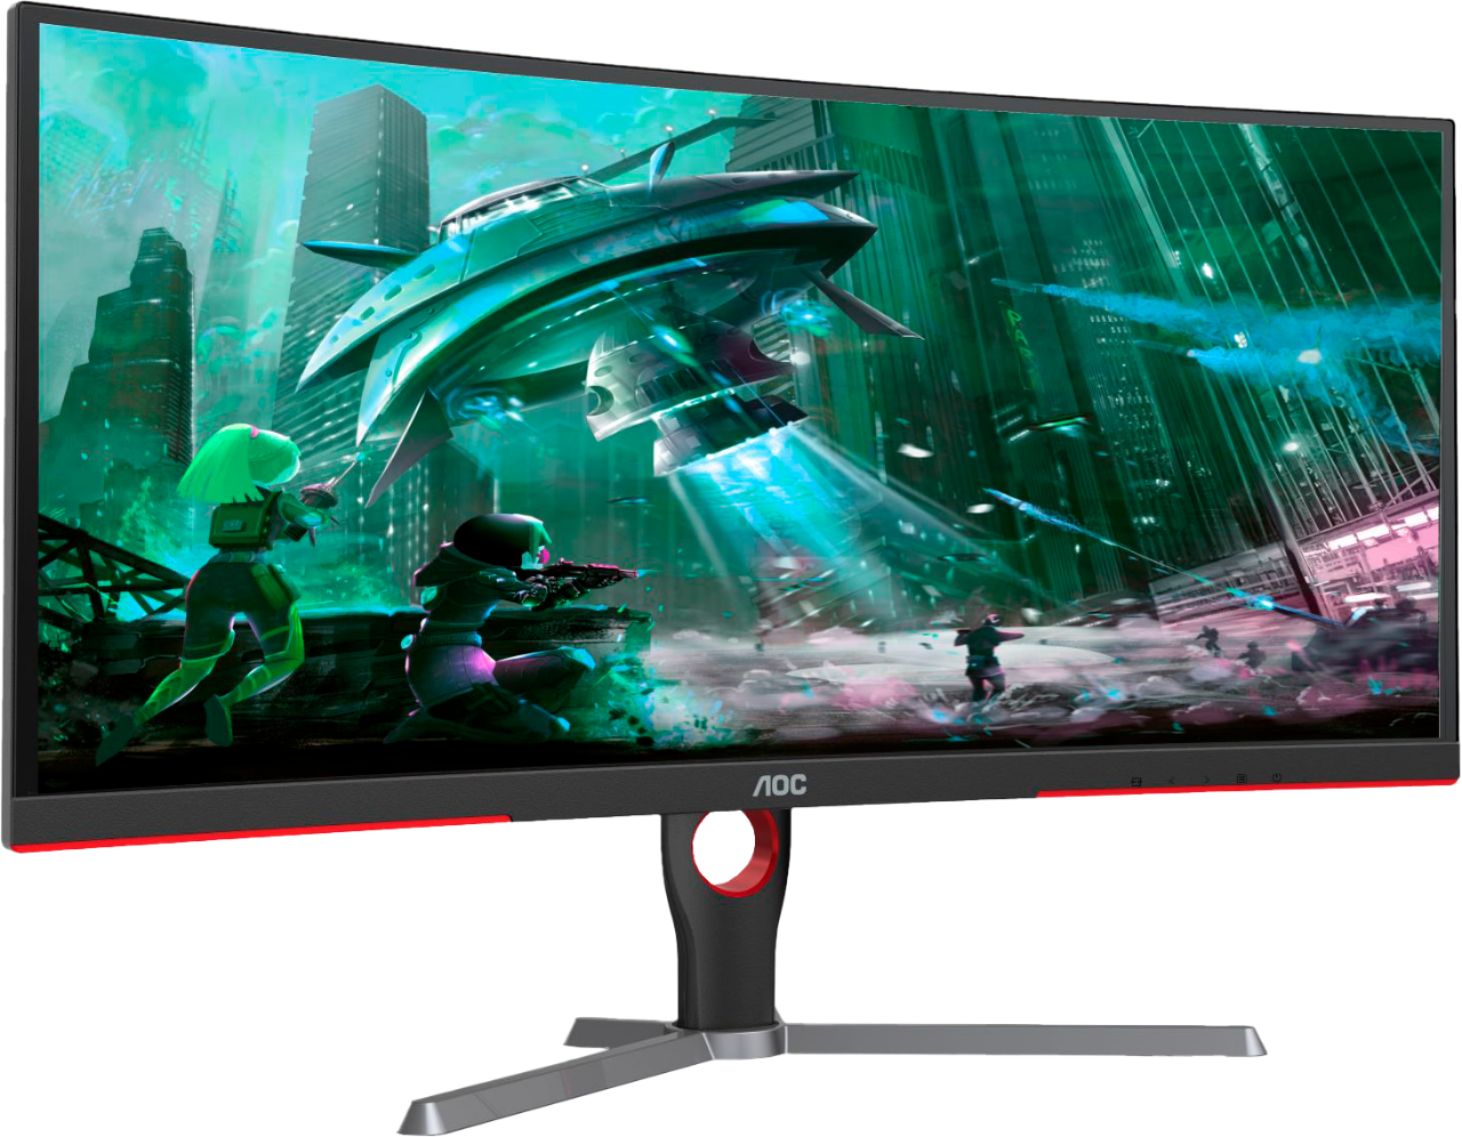 Angle View: AOC - 30" LCD Ultra Wide Curved Monitor - Black/Red